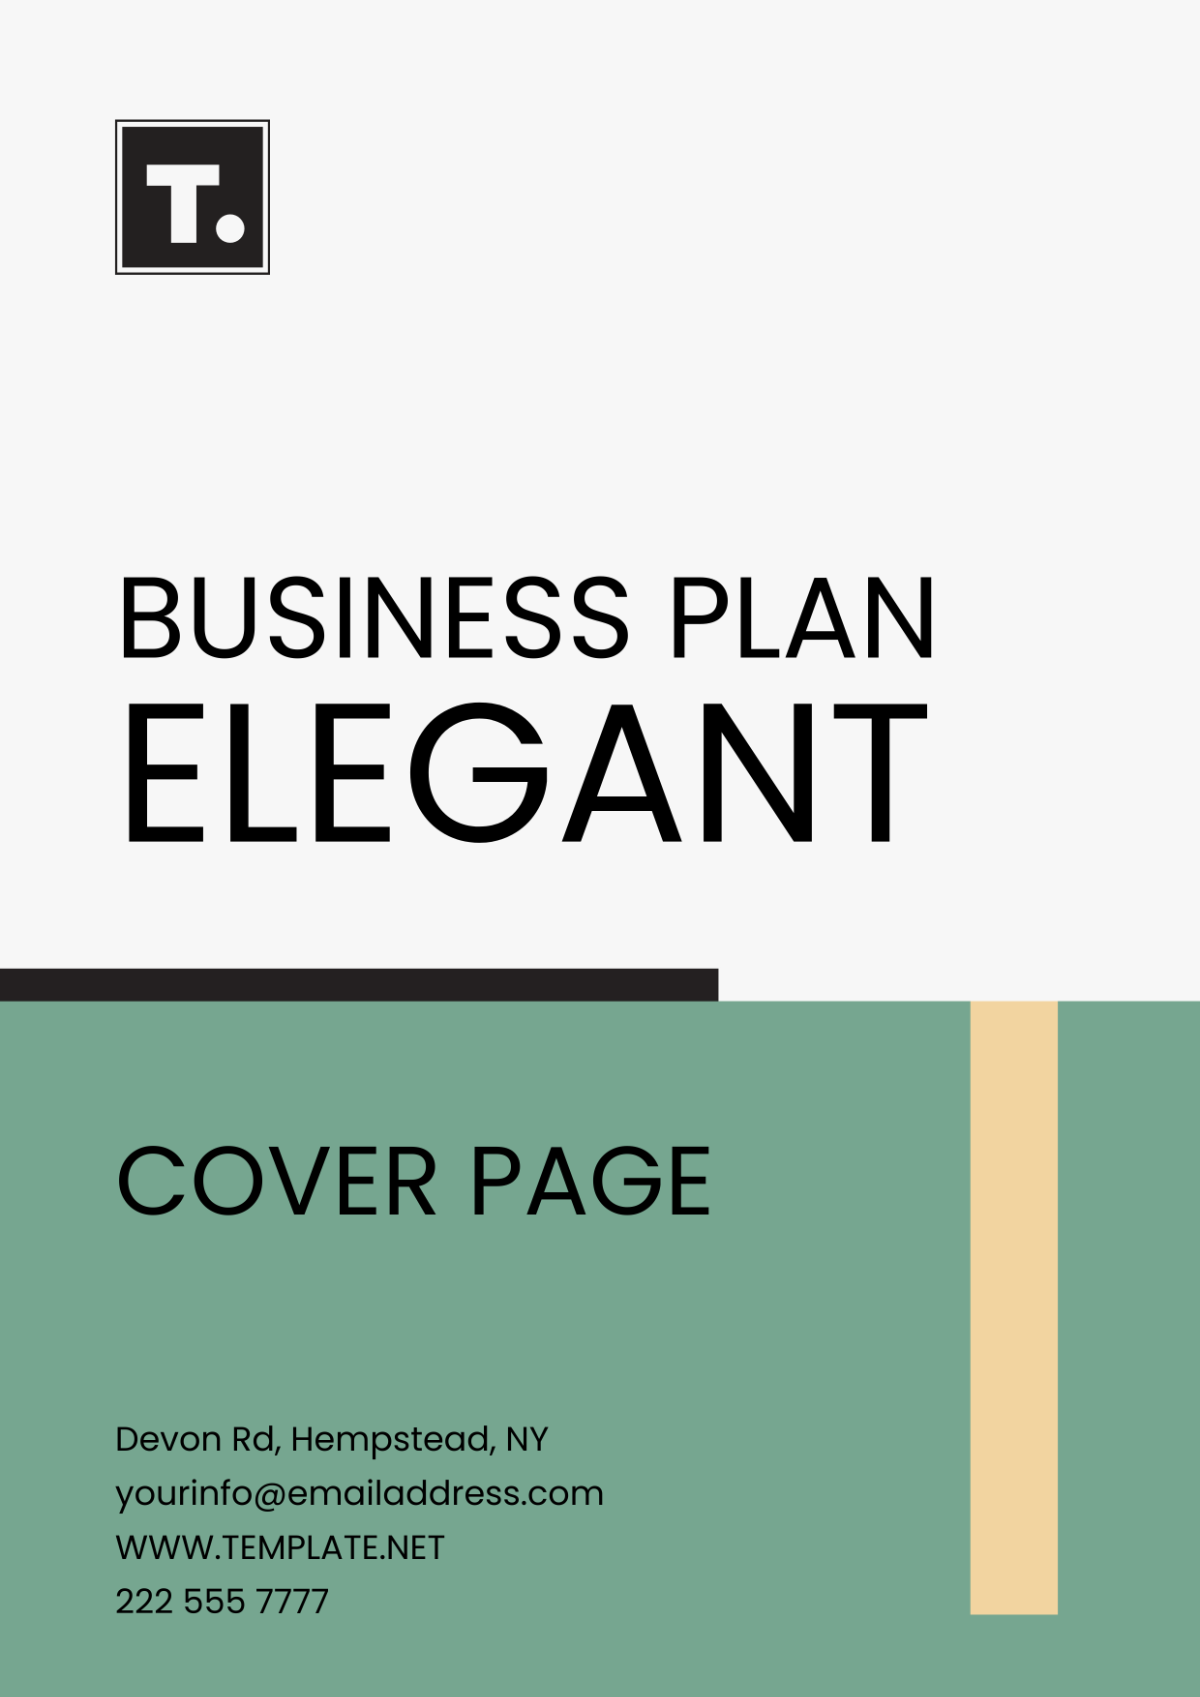 Business Plan Elegant Cover Page